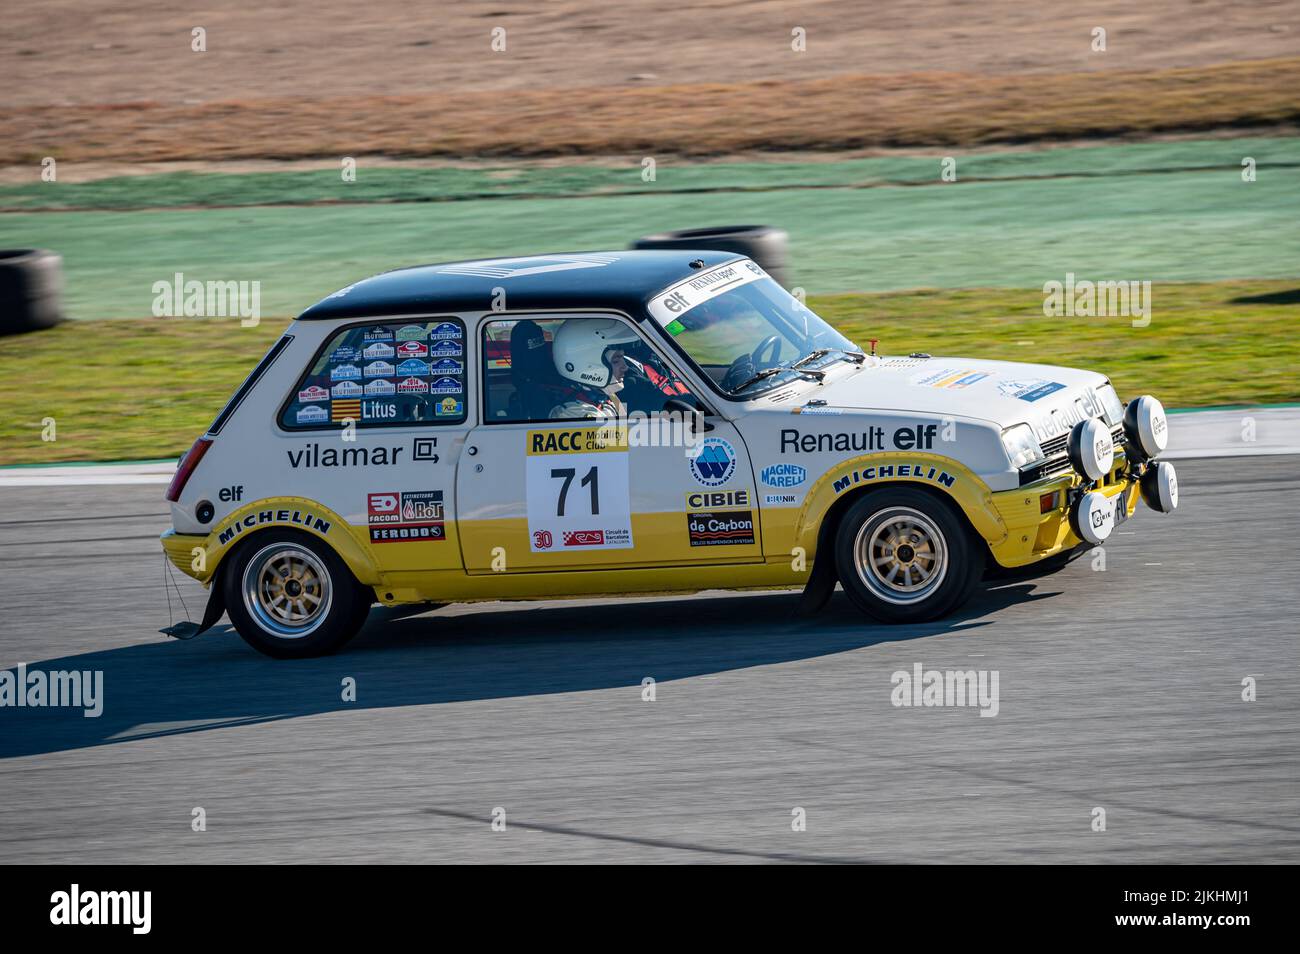 Barcelona, Spain; December 20, 2021: Renault 5 Copa Turbo Racing car in the track of Montmelo Stock Photo